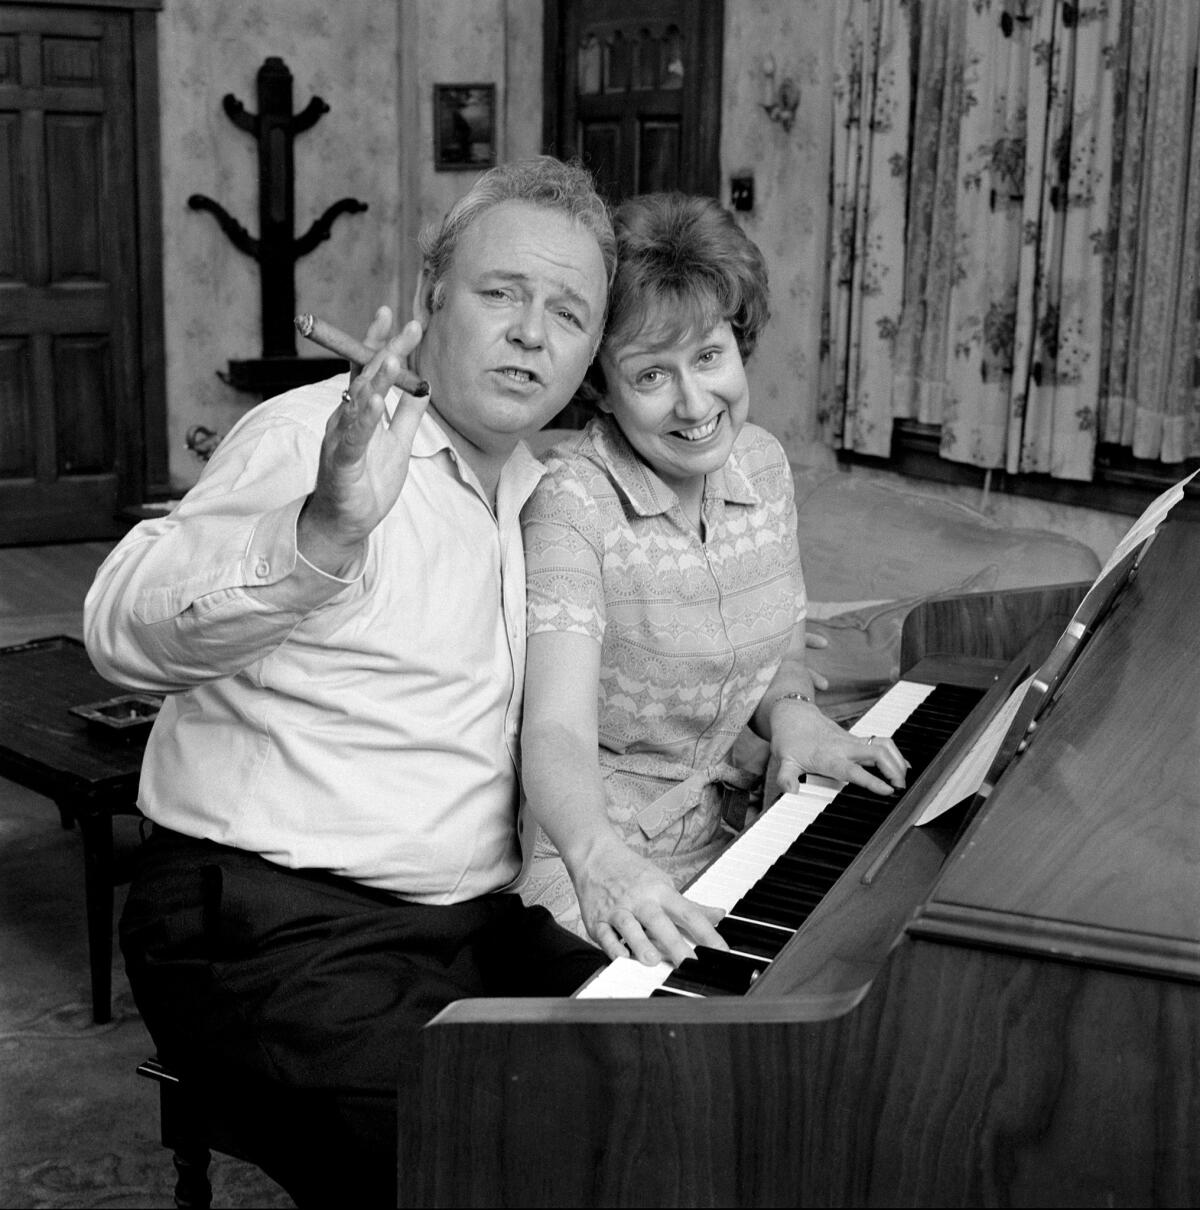 Carroll O'Connor, left, and Jean Stapleton in 1972 on the set of "All in the Family."